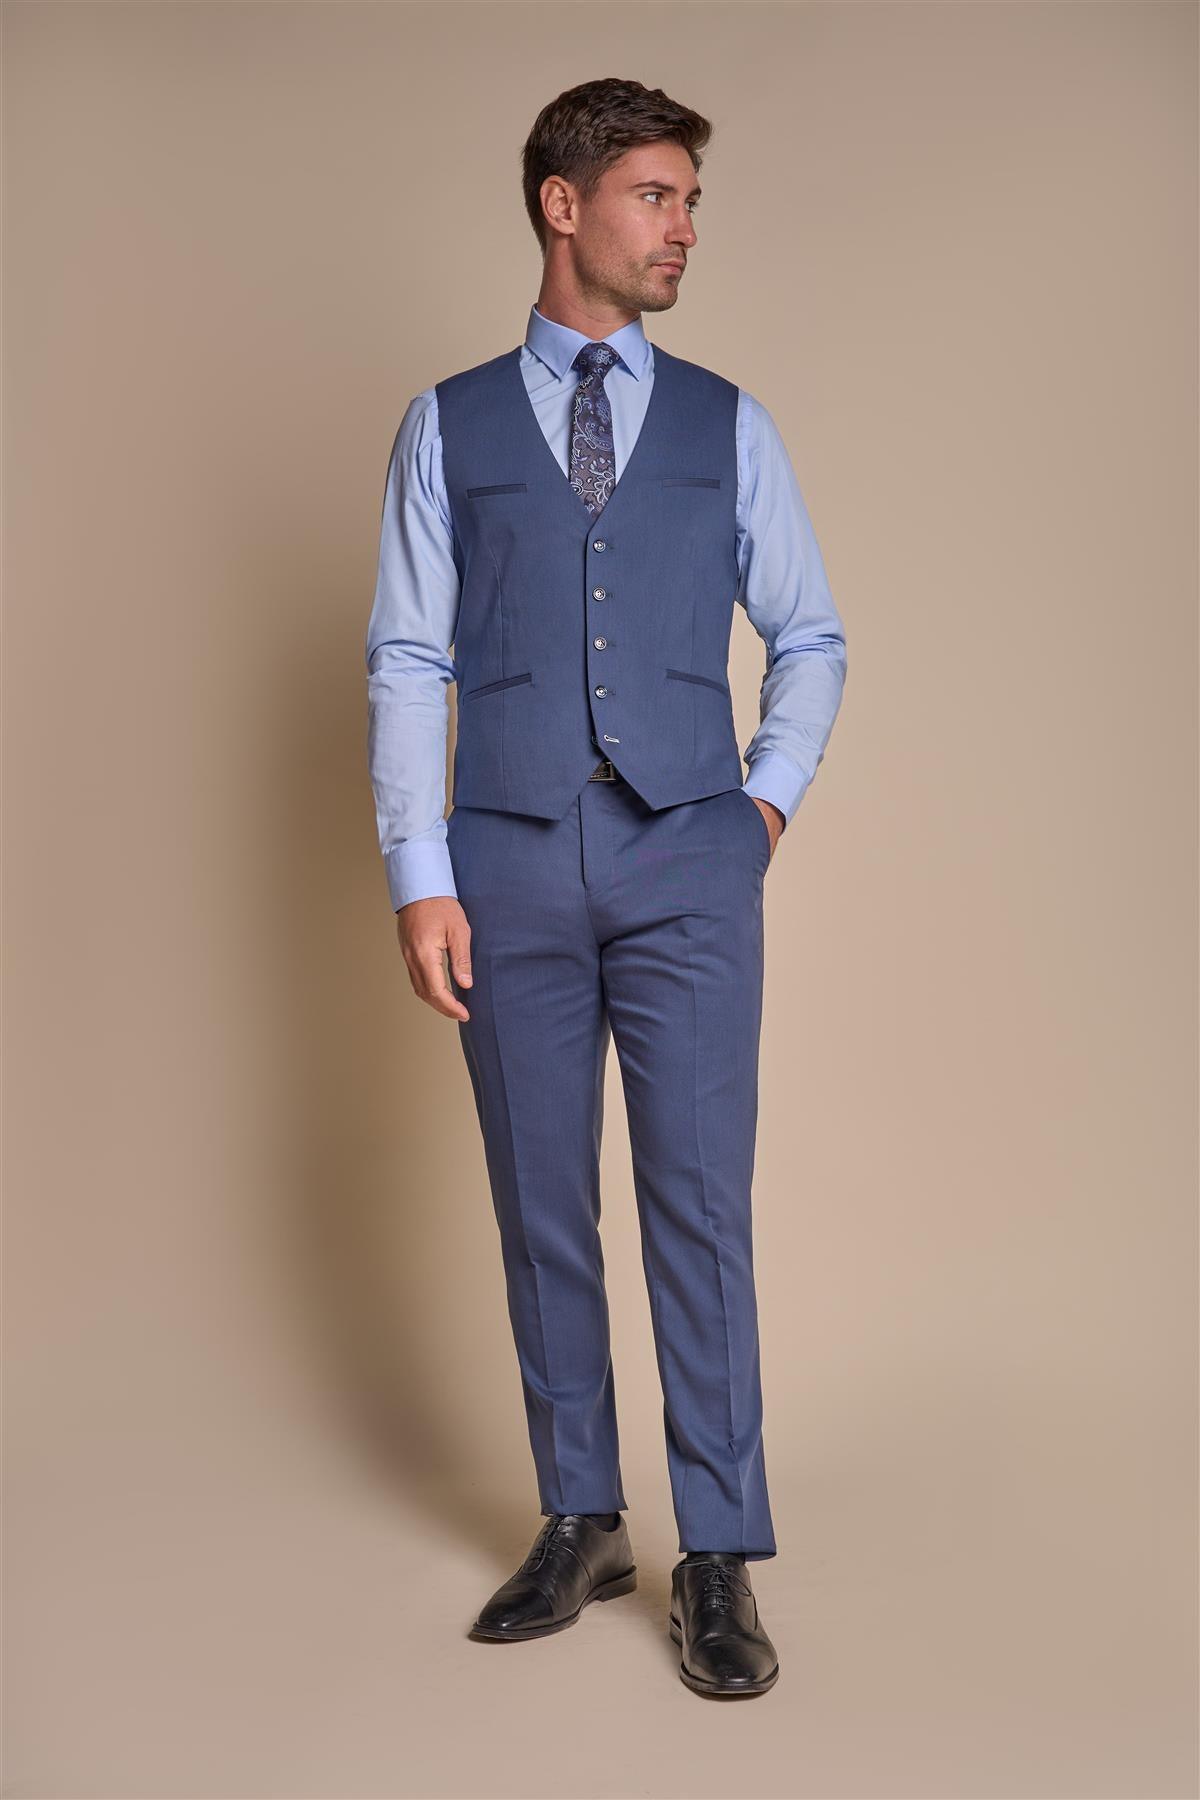 Specter Teal Waistcoat Front Full View